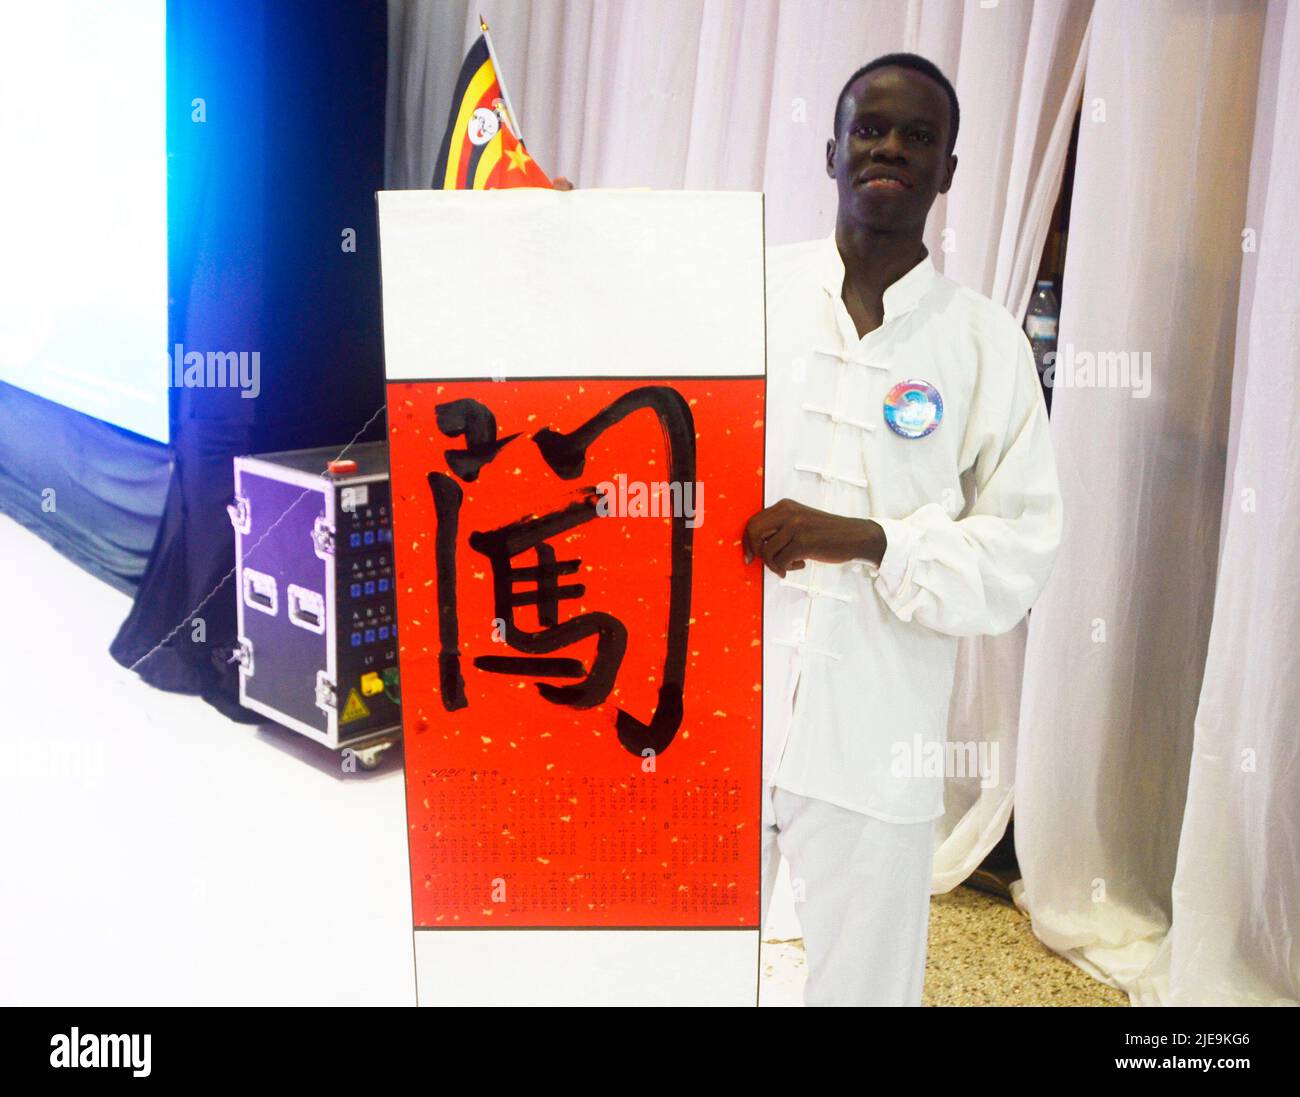 (220626) -- KAMPALA, June 26, 2022 (Xinhua) -- A contestant shows his calligraphy work during the 'Chinese Bridge' Chinese proficiency competition for university and secondary students at the Confucius Institute of Makerere University in Kampala, Uganda, June 25, 2022. This year's competition was organized with the theme 'One world, One Family' for the university category and 'Fly High with Chinese' for the secondary category. During the final round of the competition, a total of 13 finalists from the two categories showcased their Chinese language skills and understanding of the Chinese cu Stock Photo